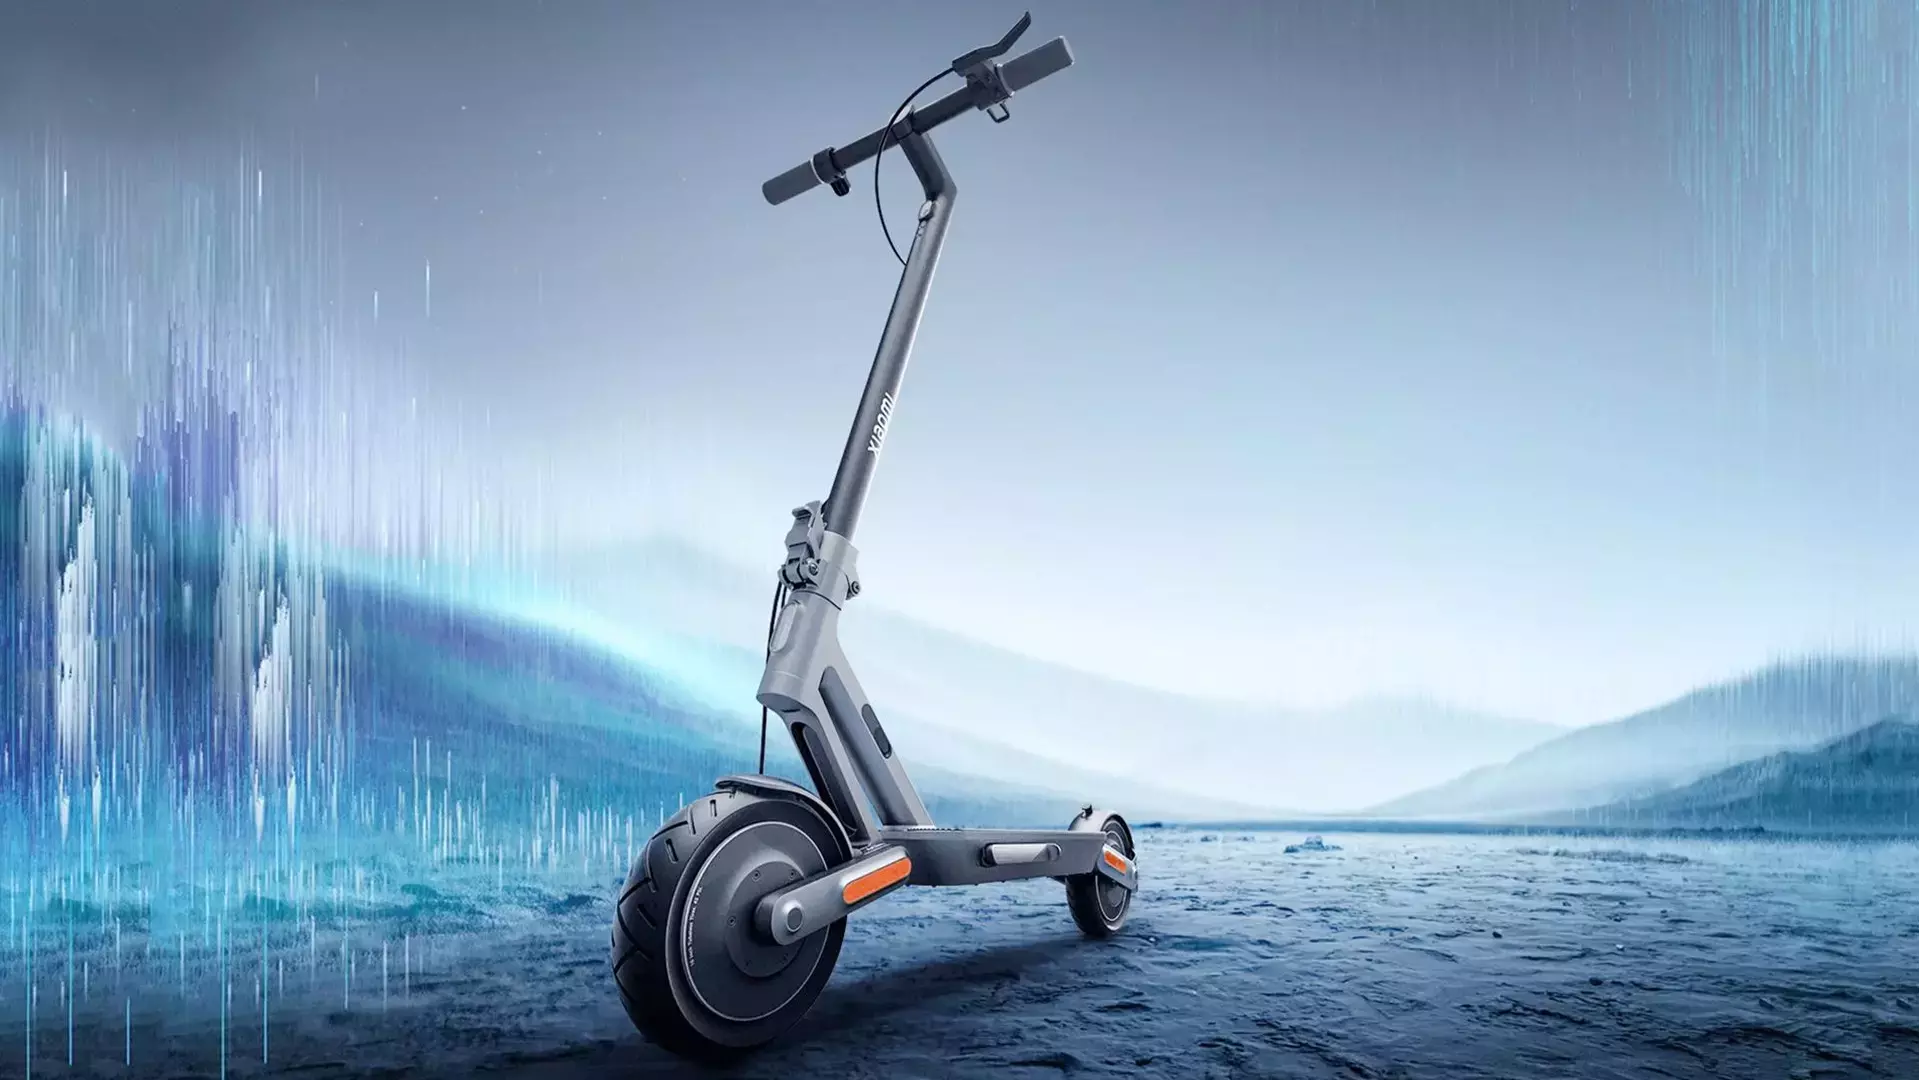 Xiaomi Electric Scooter 4 Ultra Was introduced